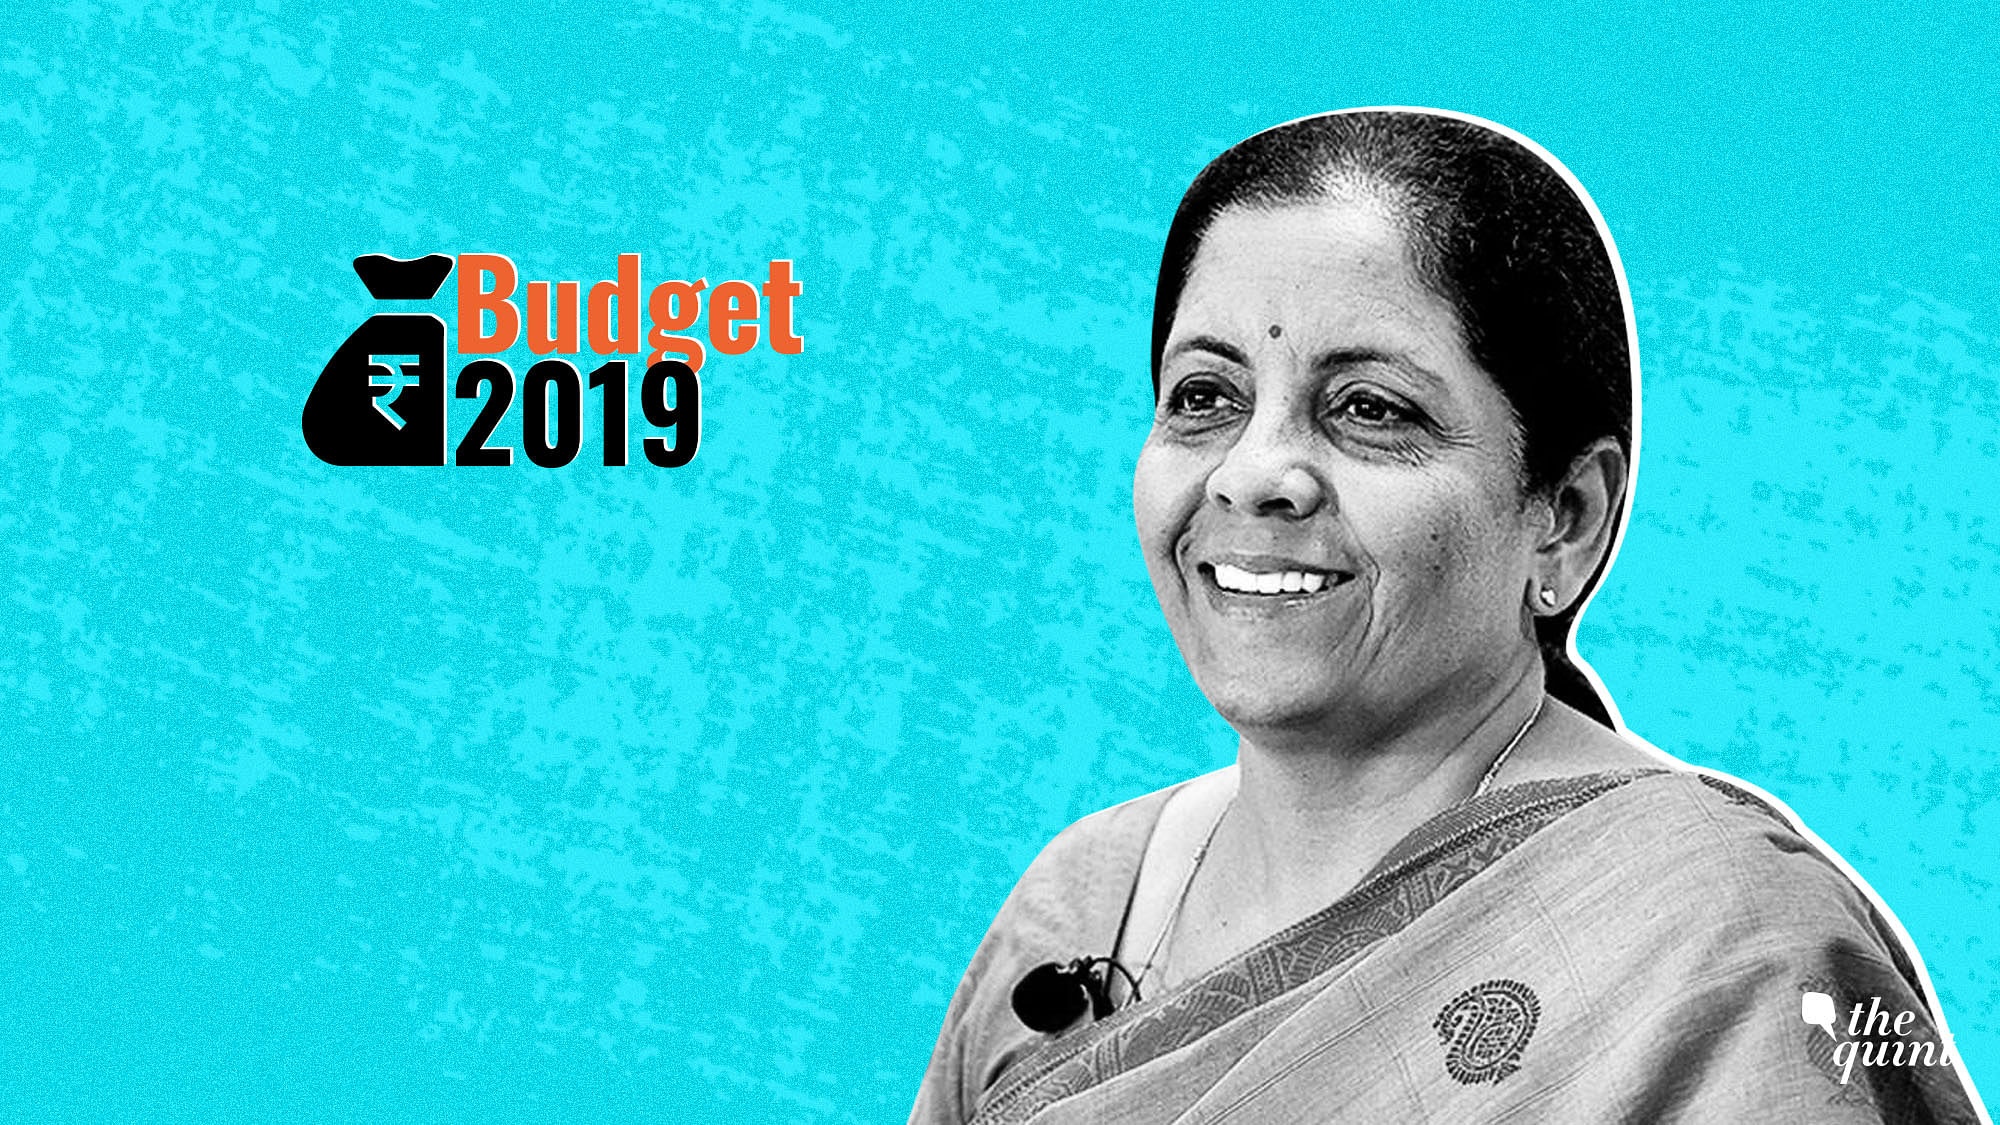 Nirmala Sitharaman stepped into the shoes of Arun Jaitley, who opted out of Modi 2.0 Cabinet.